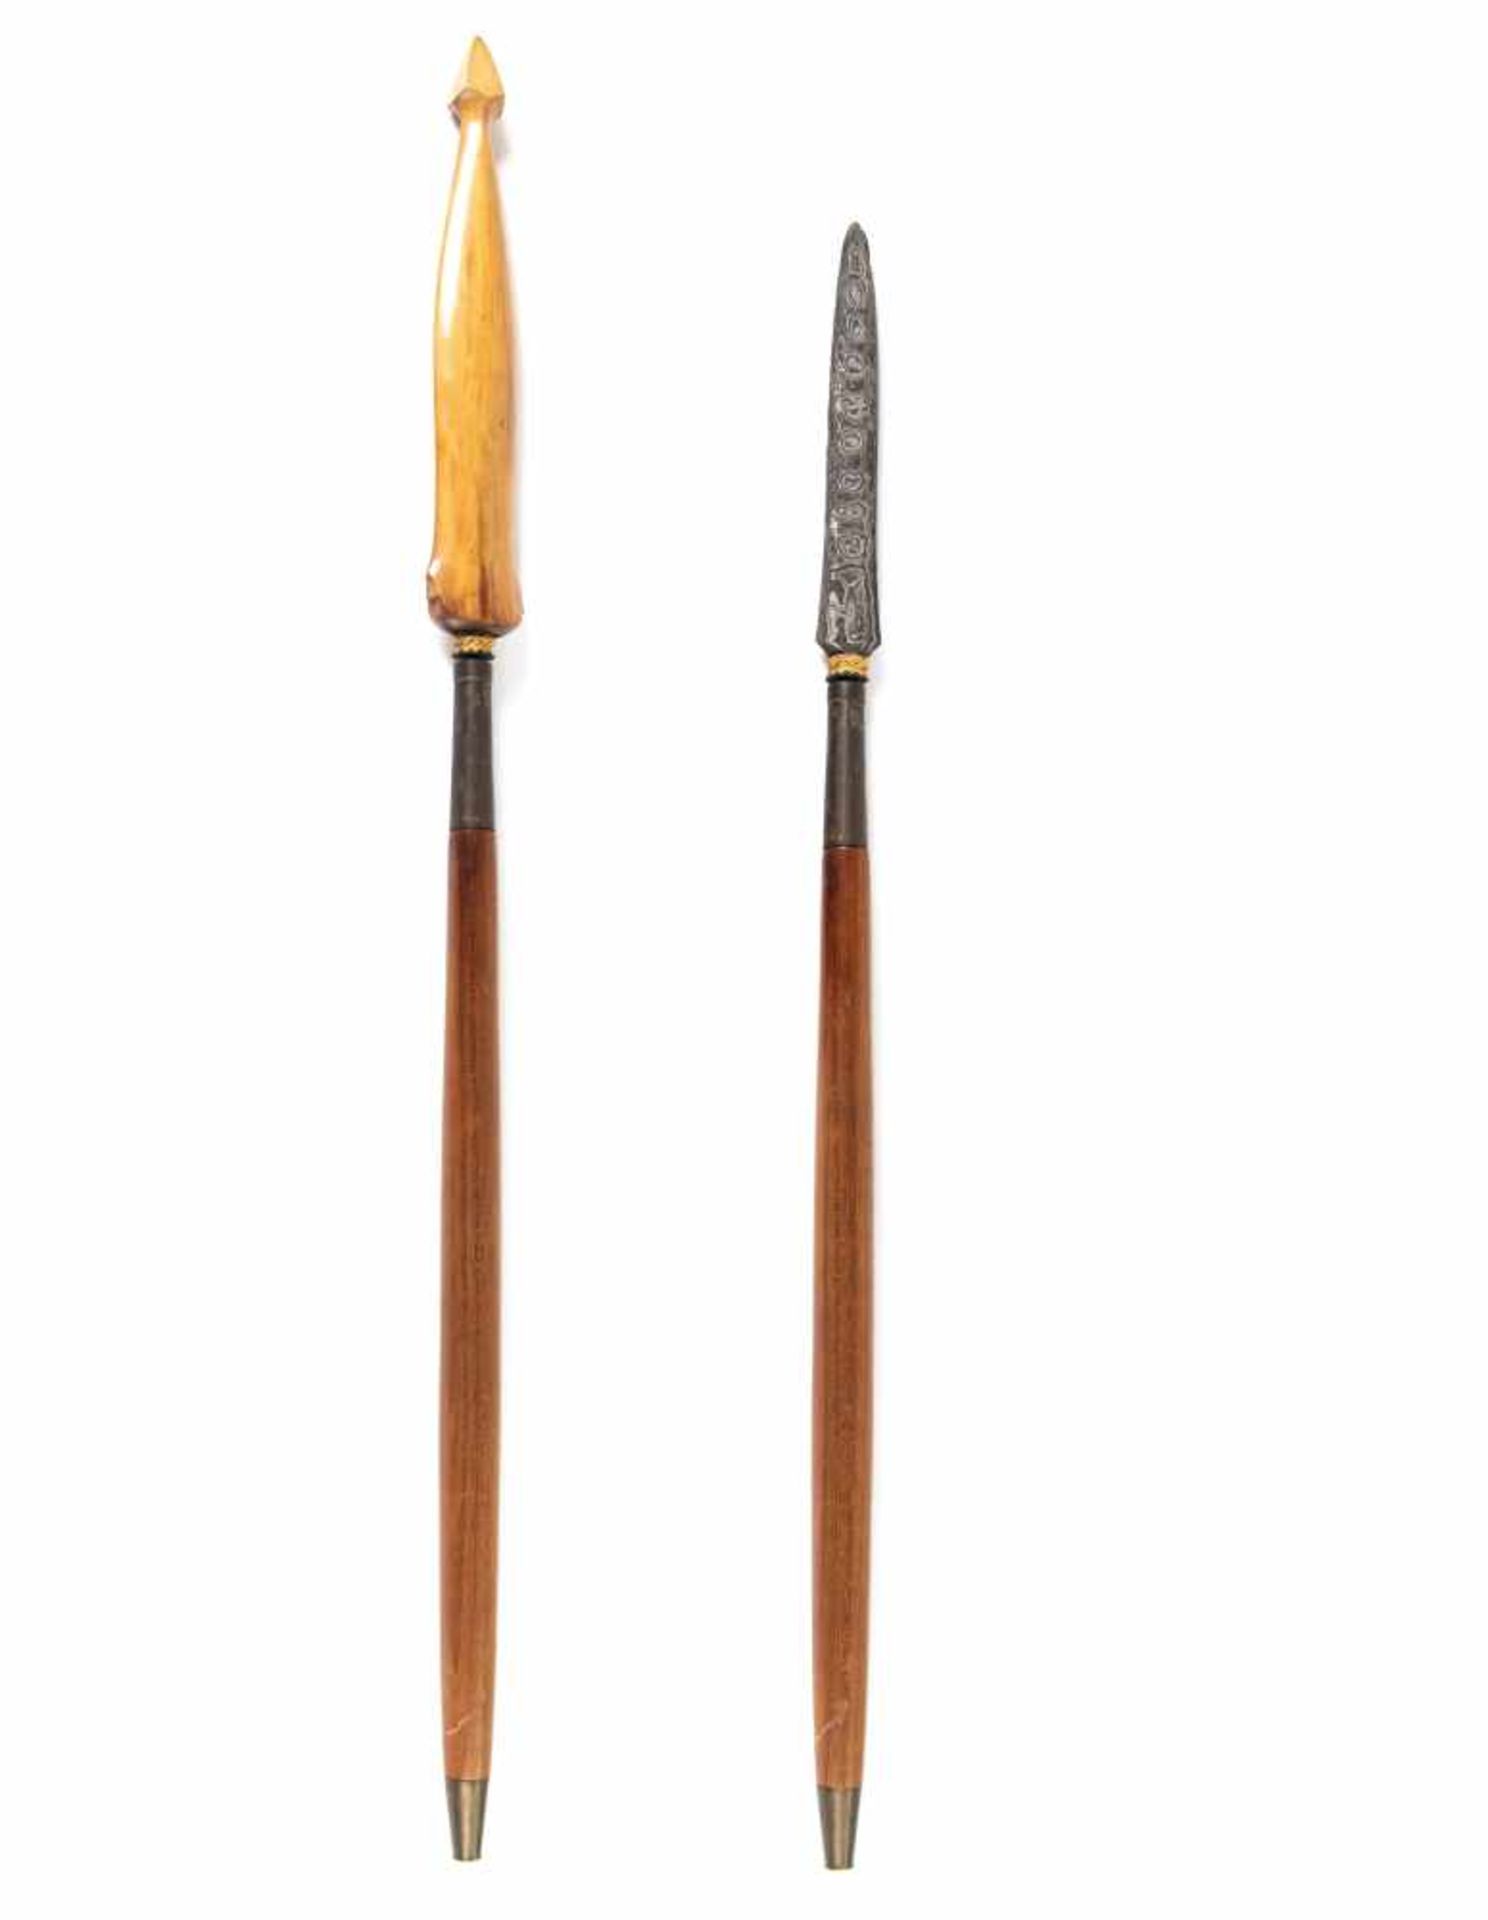 A Javanese Tombak or Lembing, with 19th century blade.A Javanese Tombak or Lembing, with 19th